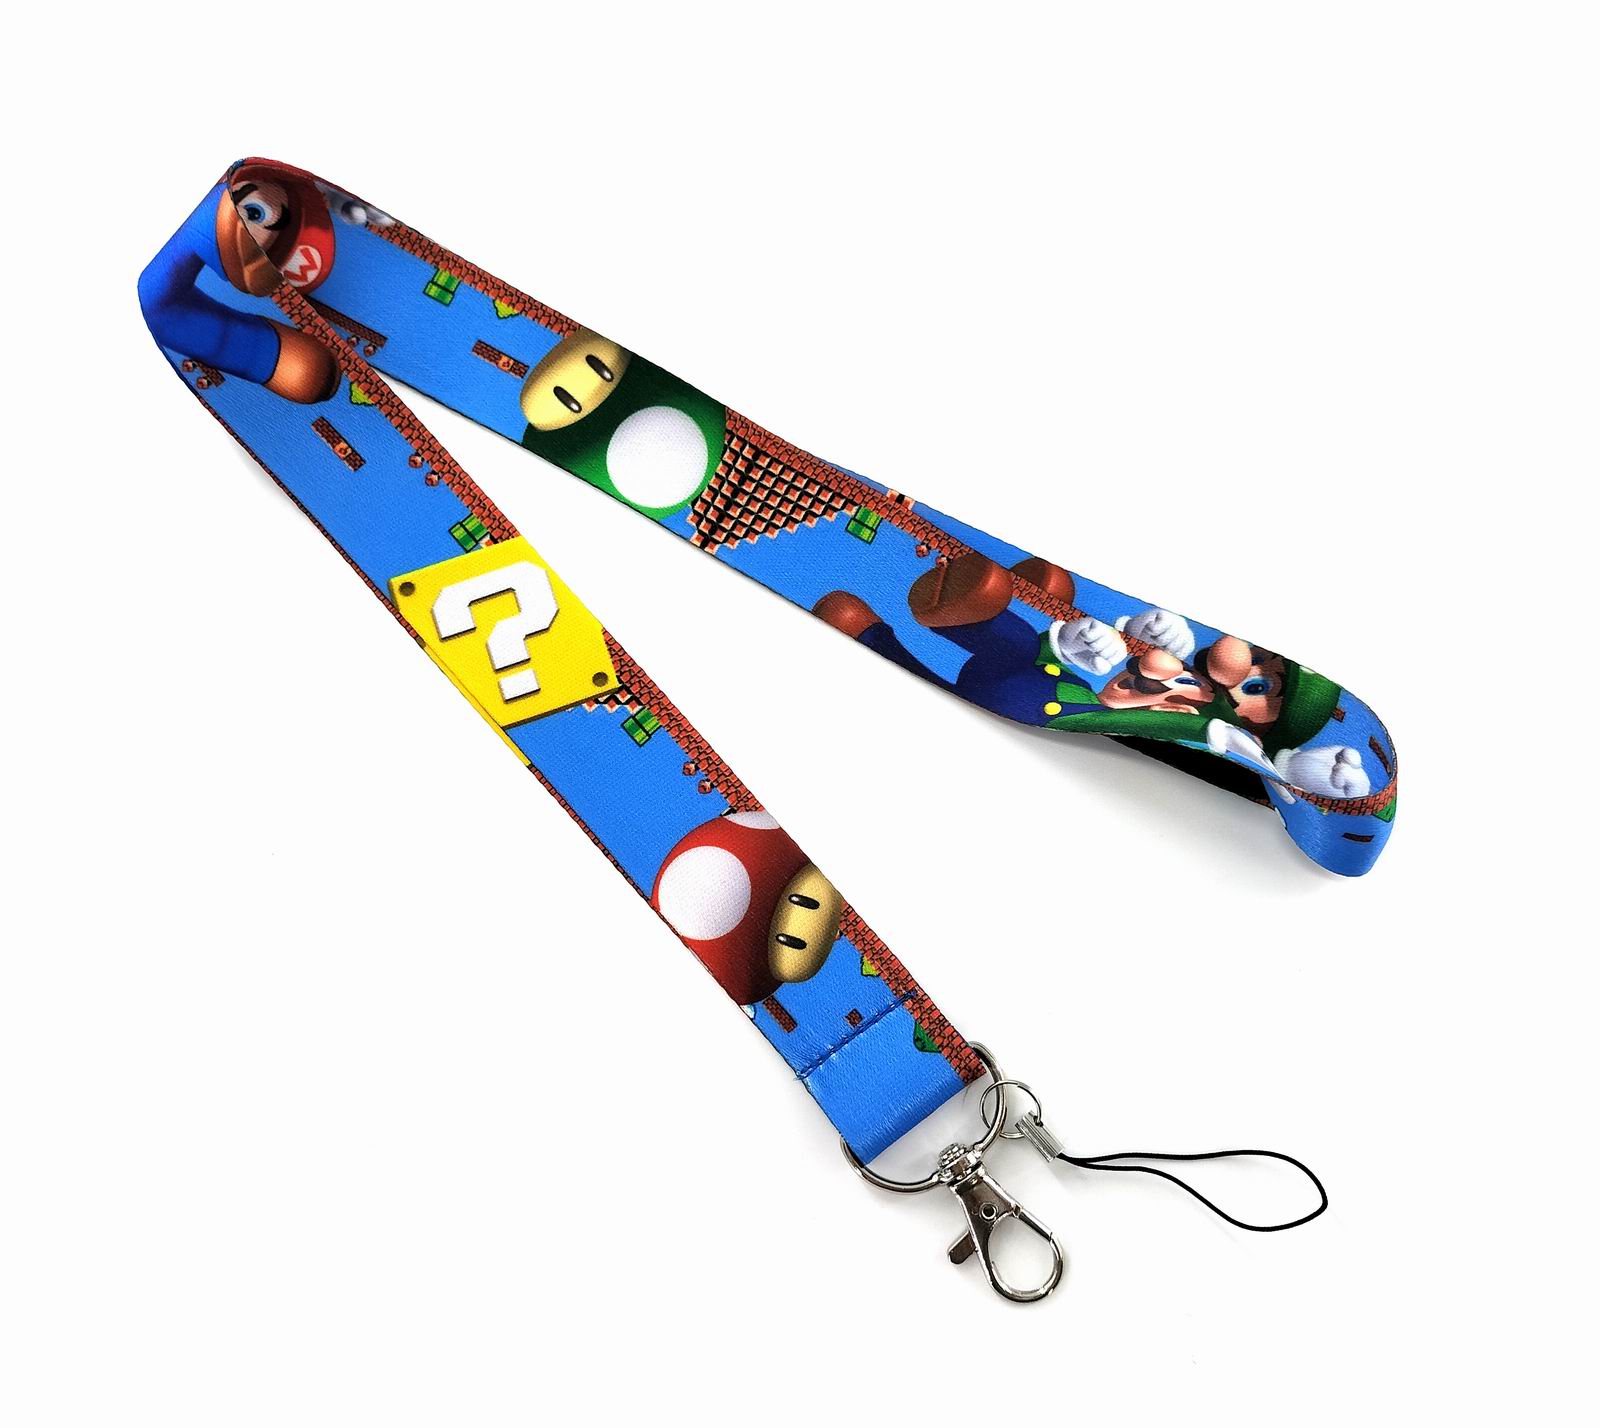 

10pcs/lot Cartoon Game Lanyard For keys Funny ID Badge Holder Neck Straps With Phone Hang Ropes Gift